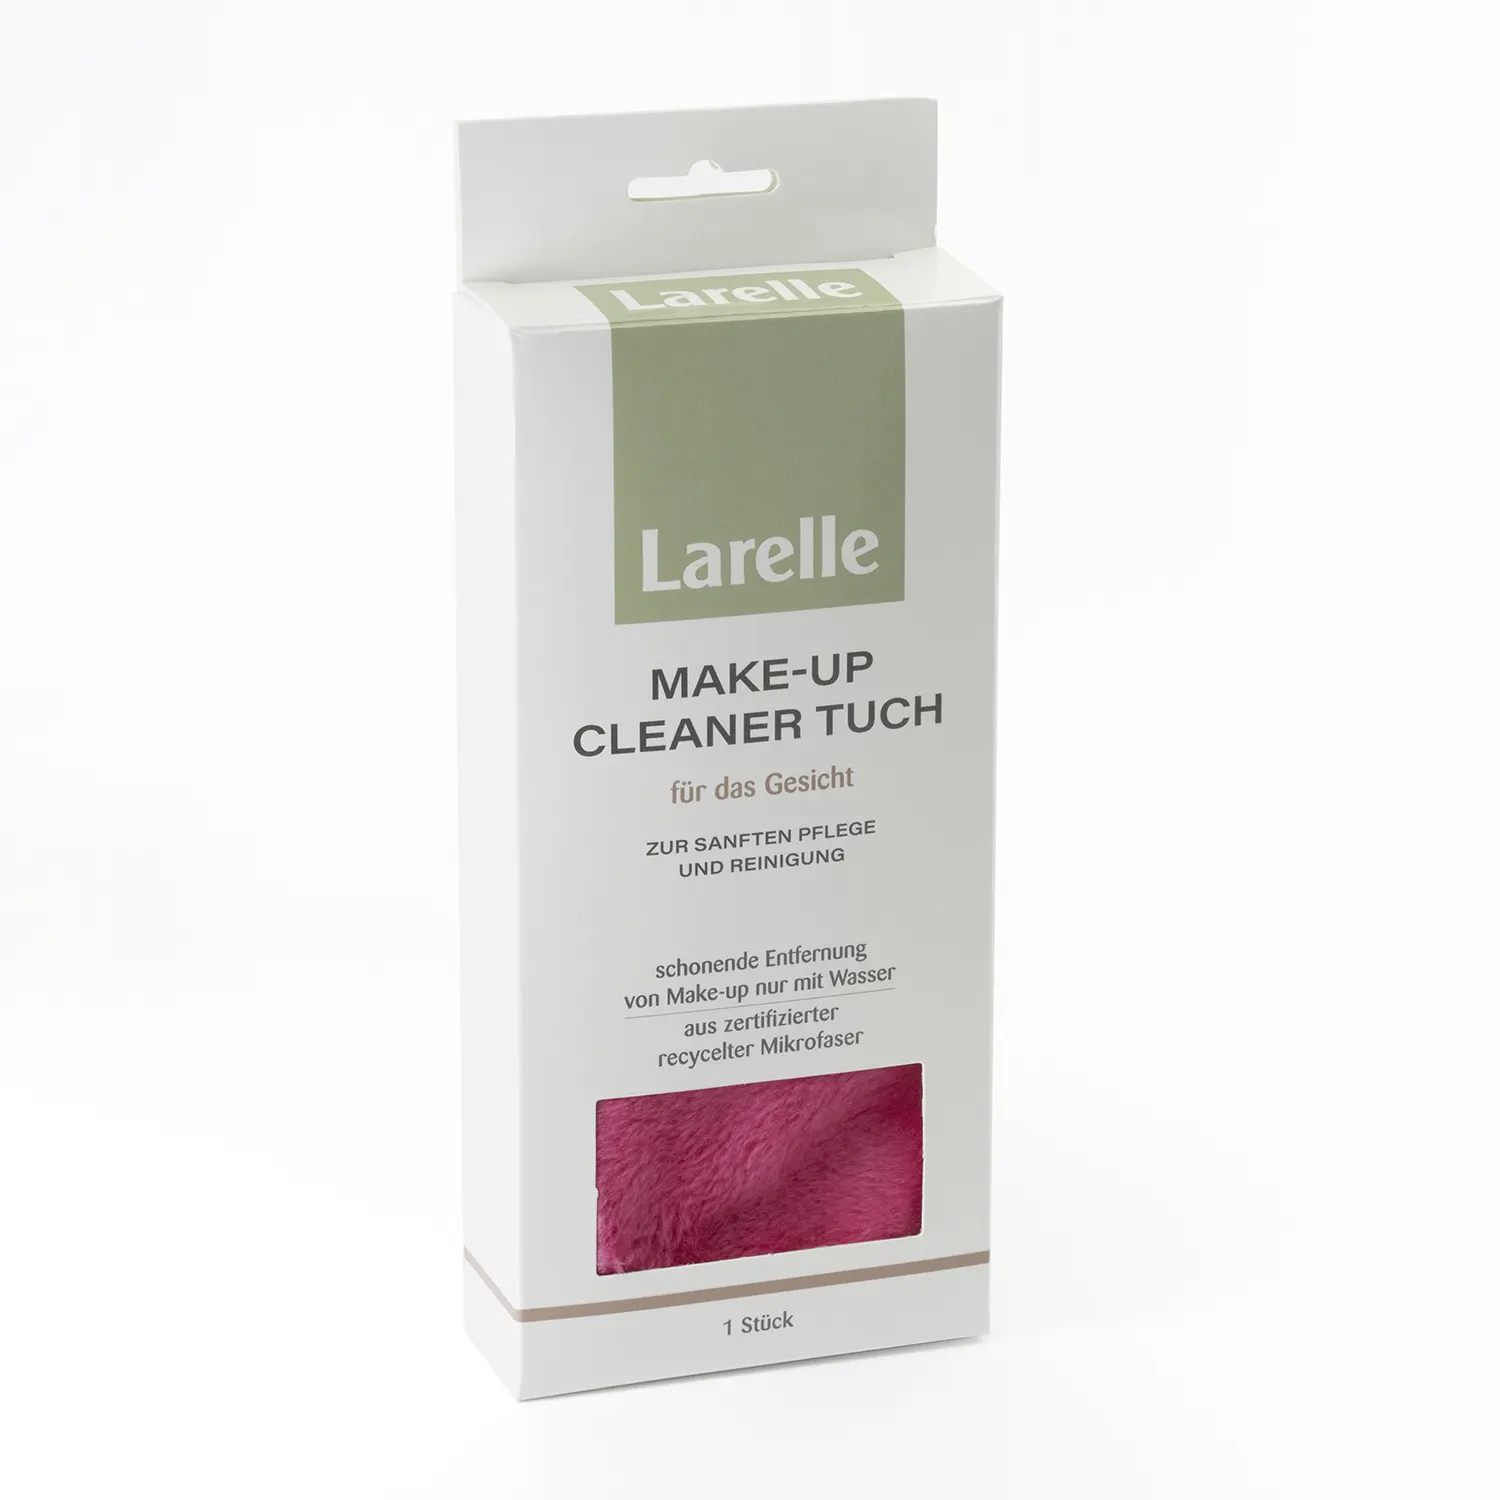 418 Larelle Cleaner Tuch